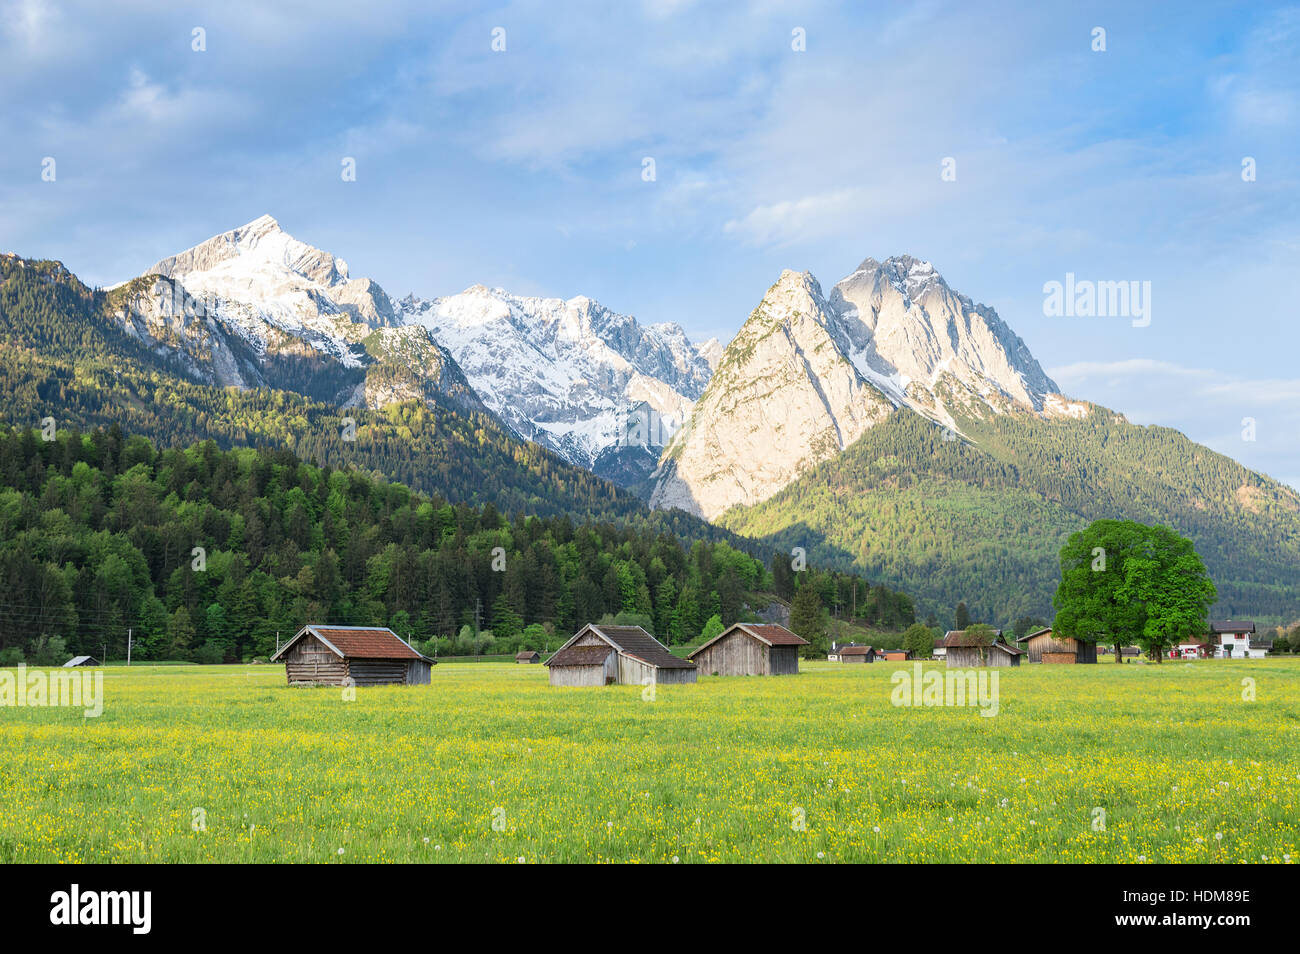 Bavarian serene landscape with snowy Alps mountains ridge and spring flowering pasture in valley Stock Photo